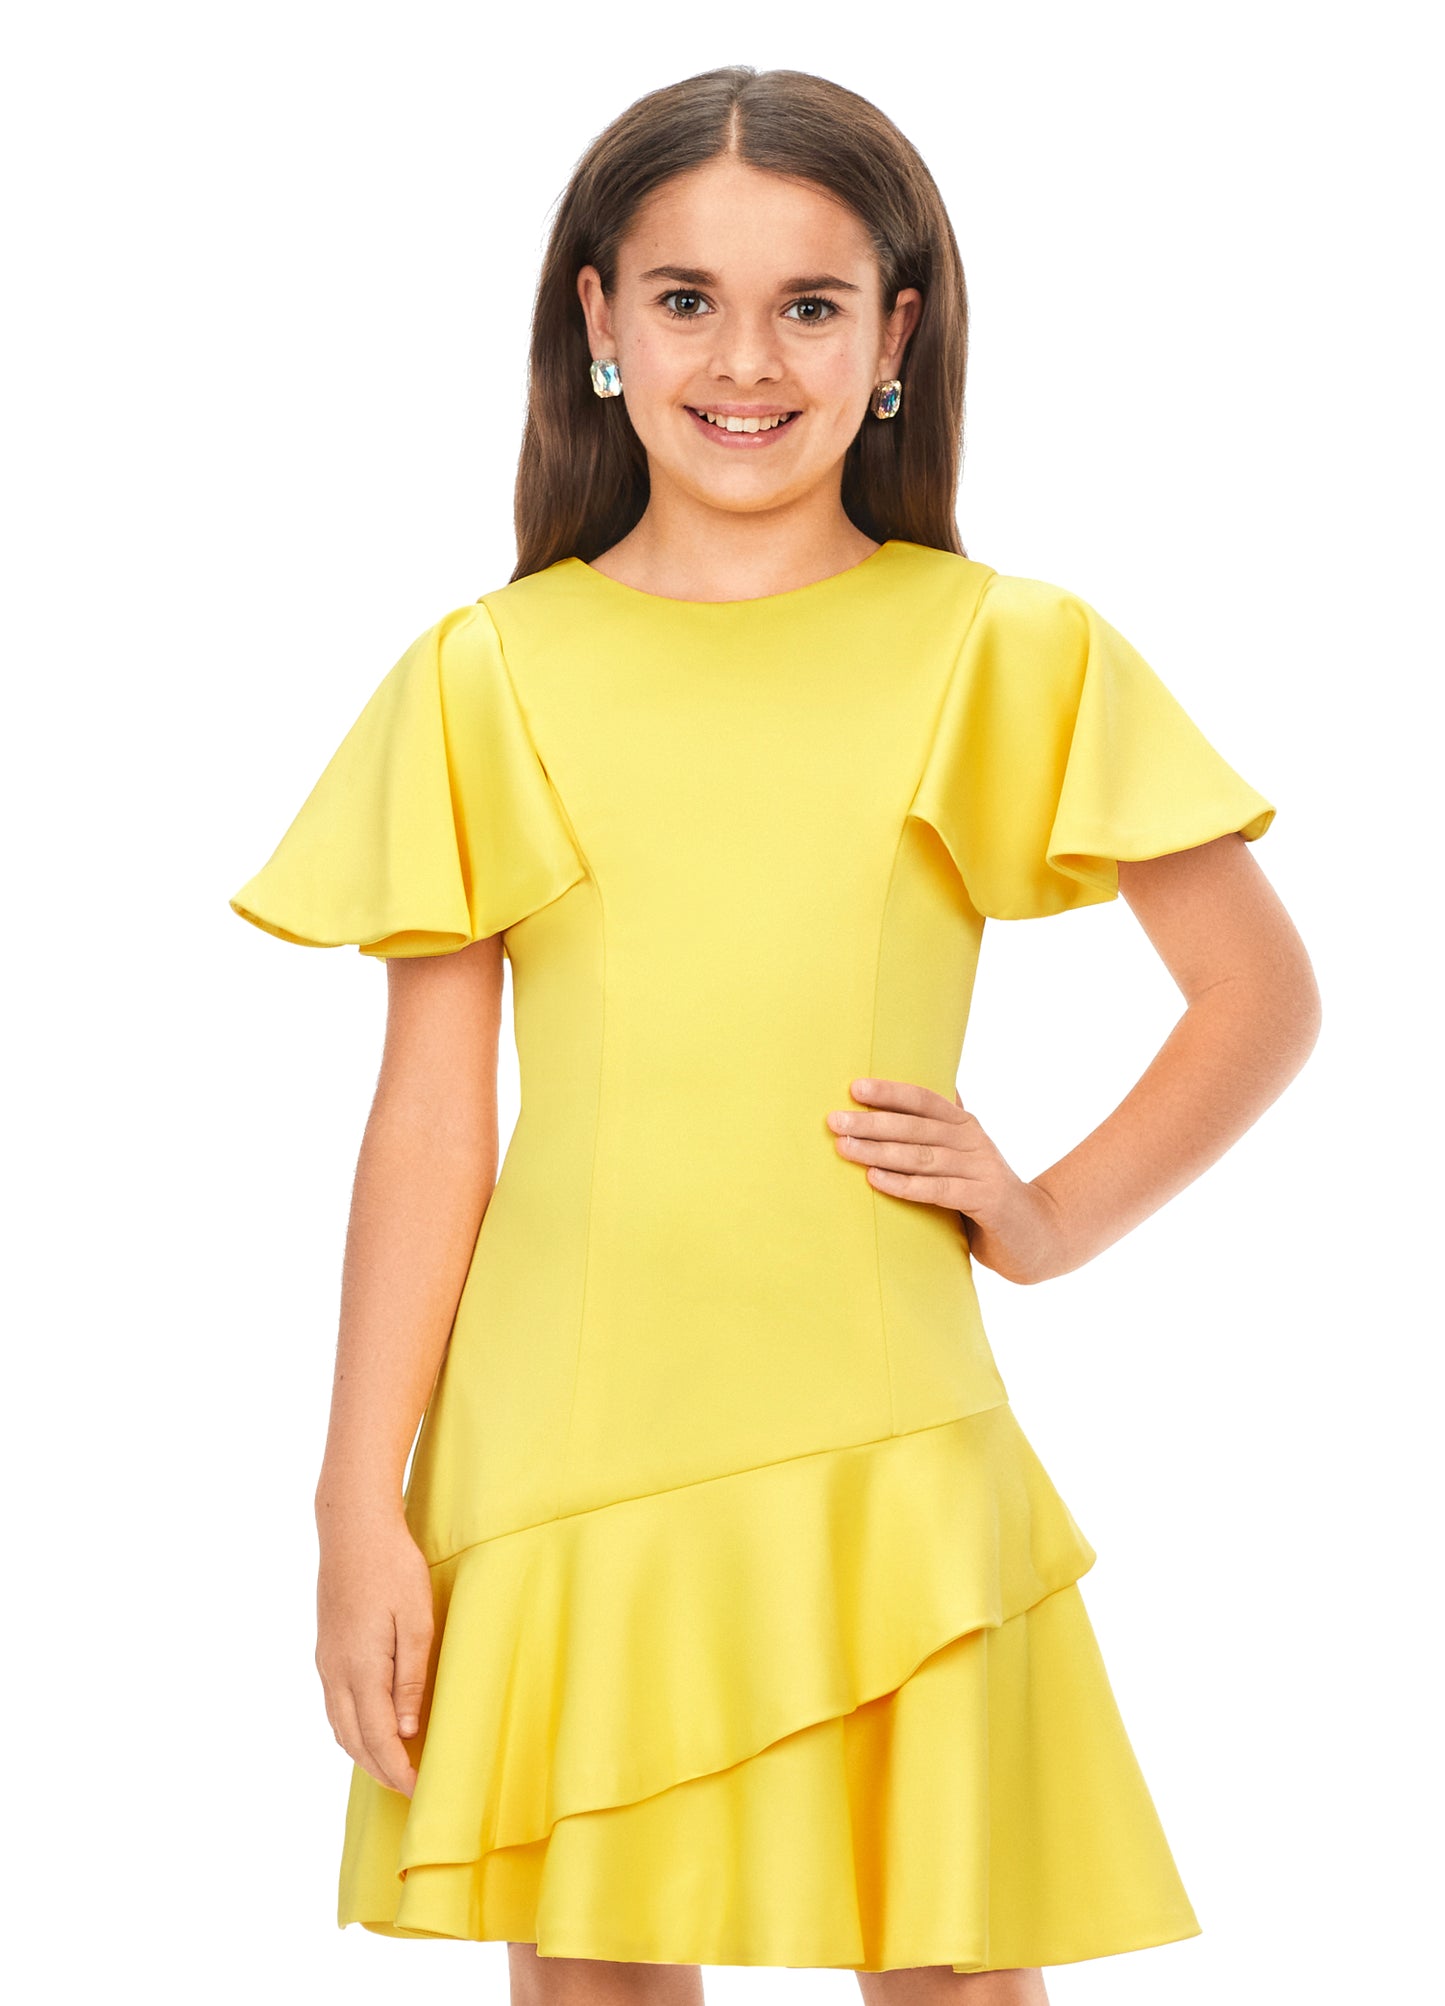 Ashley Lauren Kids 8167 Girls Crepe Cocktail Dress with Ruffle Details  A crepe dress perfect for any event. This dress features flutter sleeves and an asymmetric ruffle skirt yellow